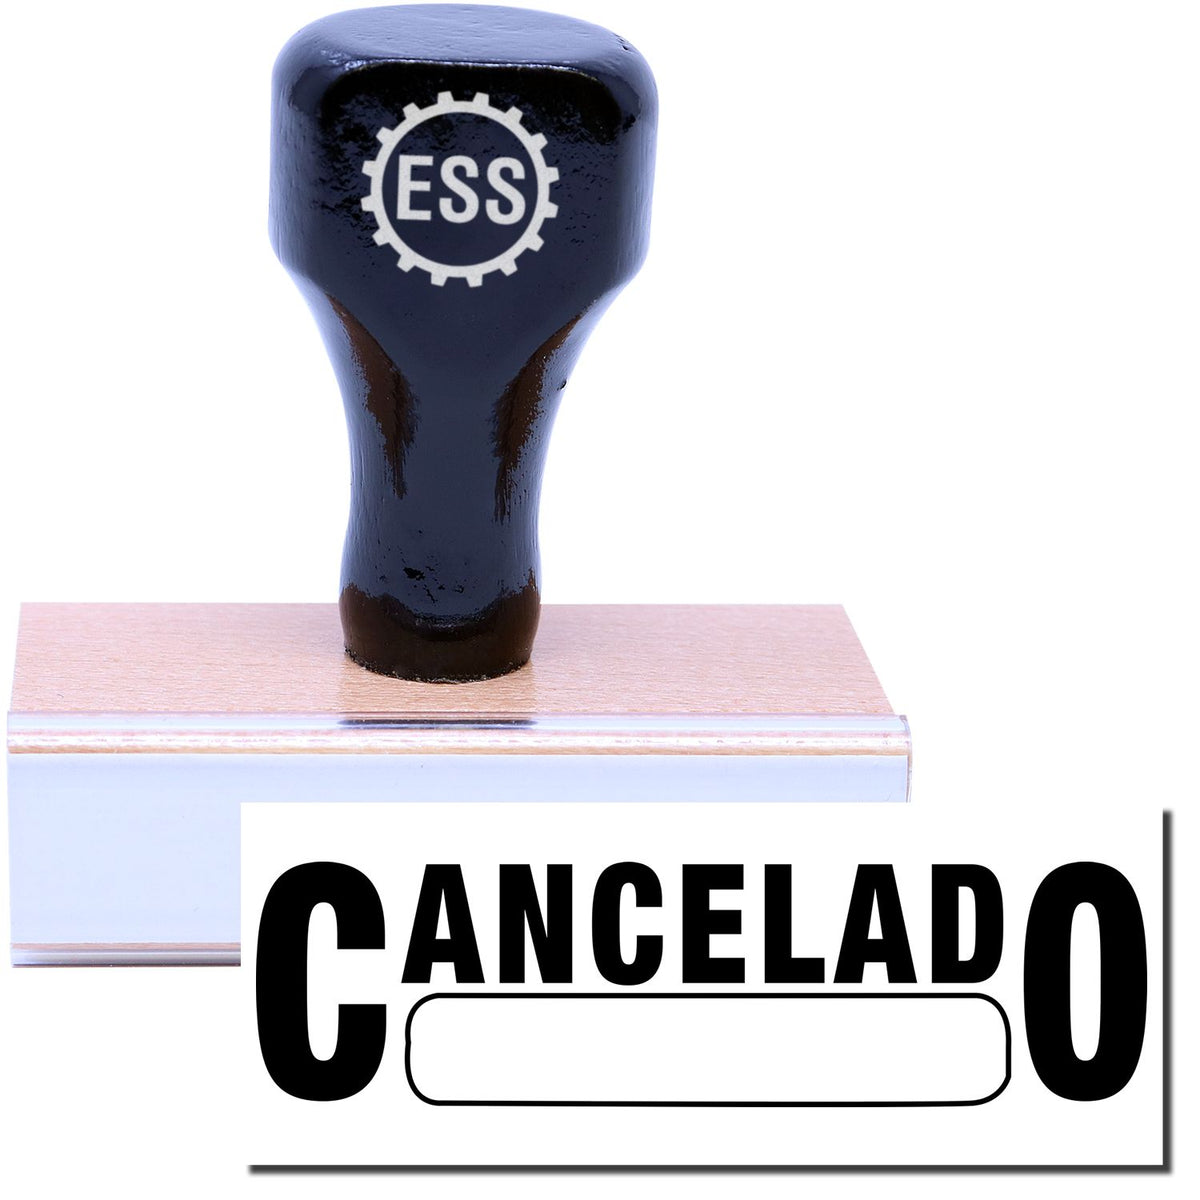 A stock office rubber stamp with a stamped image showing how the text &quot;CANCELADO&quot; in a large font with a box is displayed after stamping.